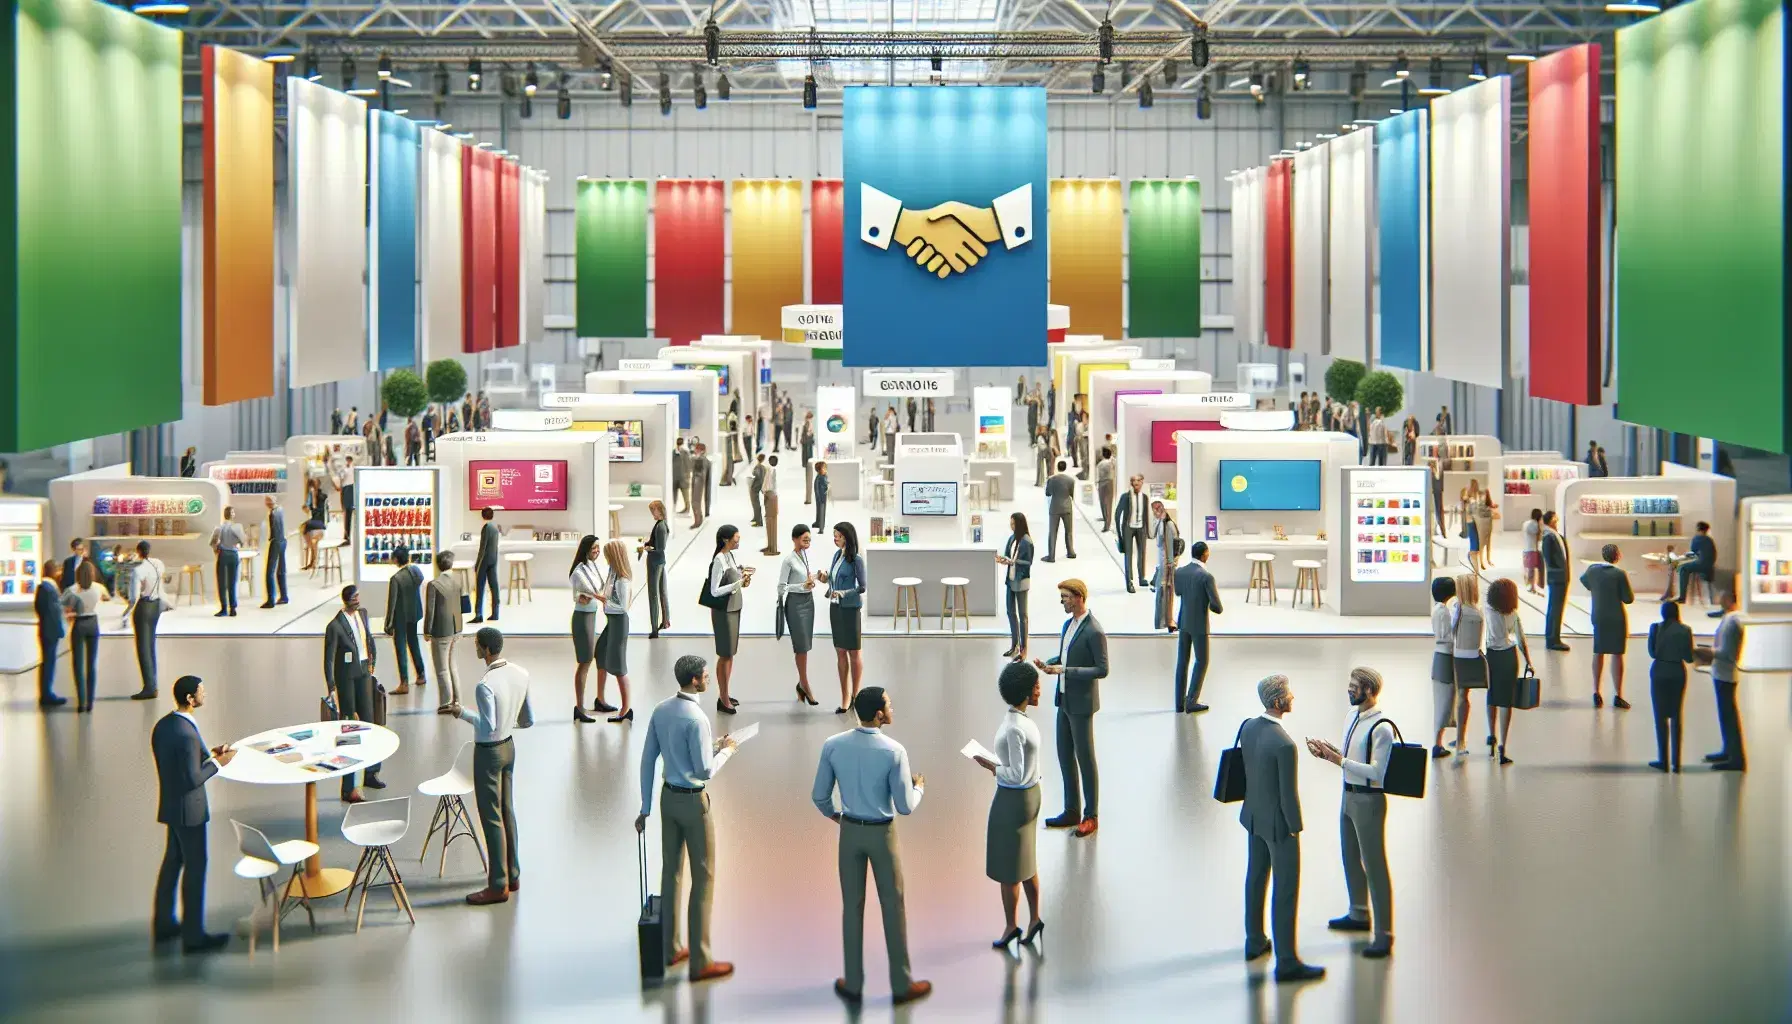 Professionals networking at a marketing event with modern booths, product demonstrations, and a handshake image on a large screen, in a bright convention center.